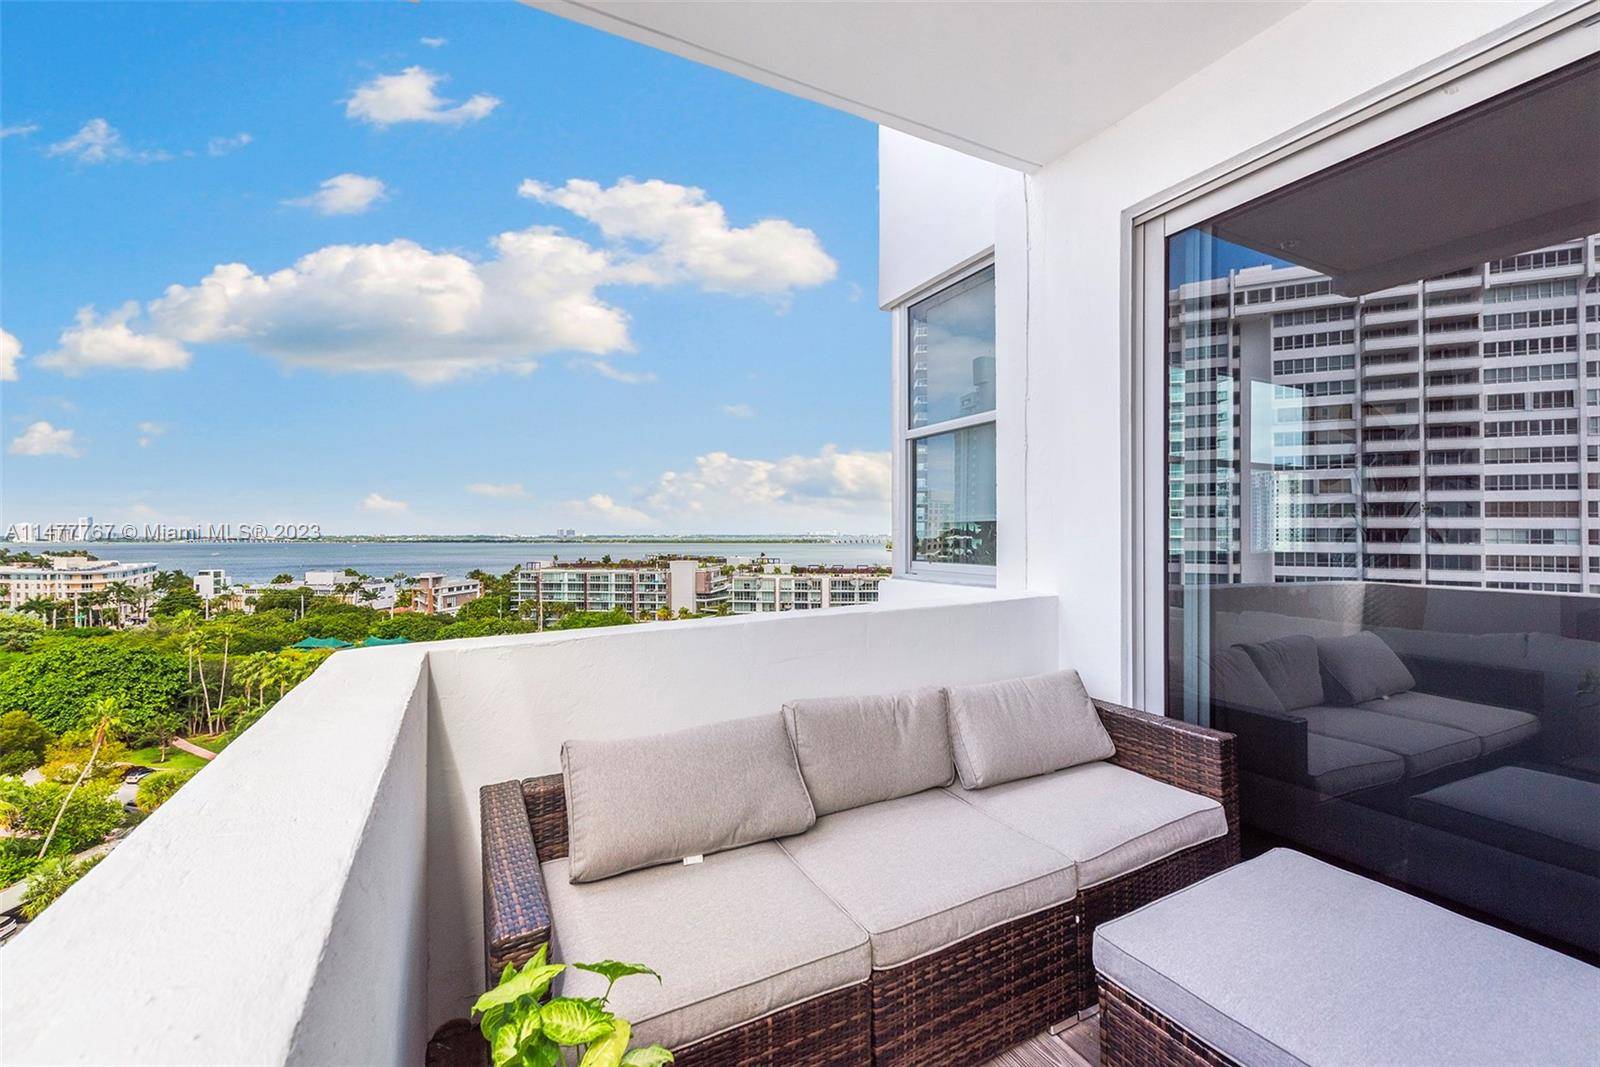 Bright and spacious 2 bedroom, 2 bath corner residence at Belle Plaza, in the heart of Miami Beach.